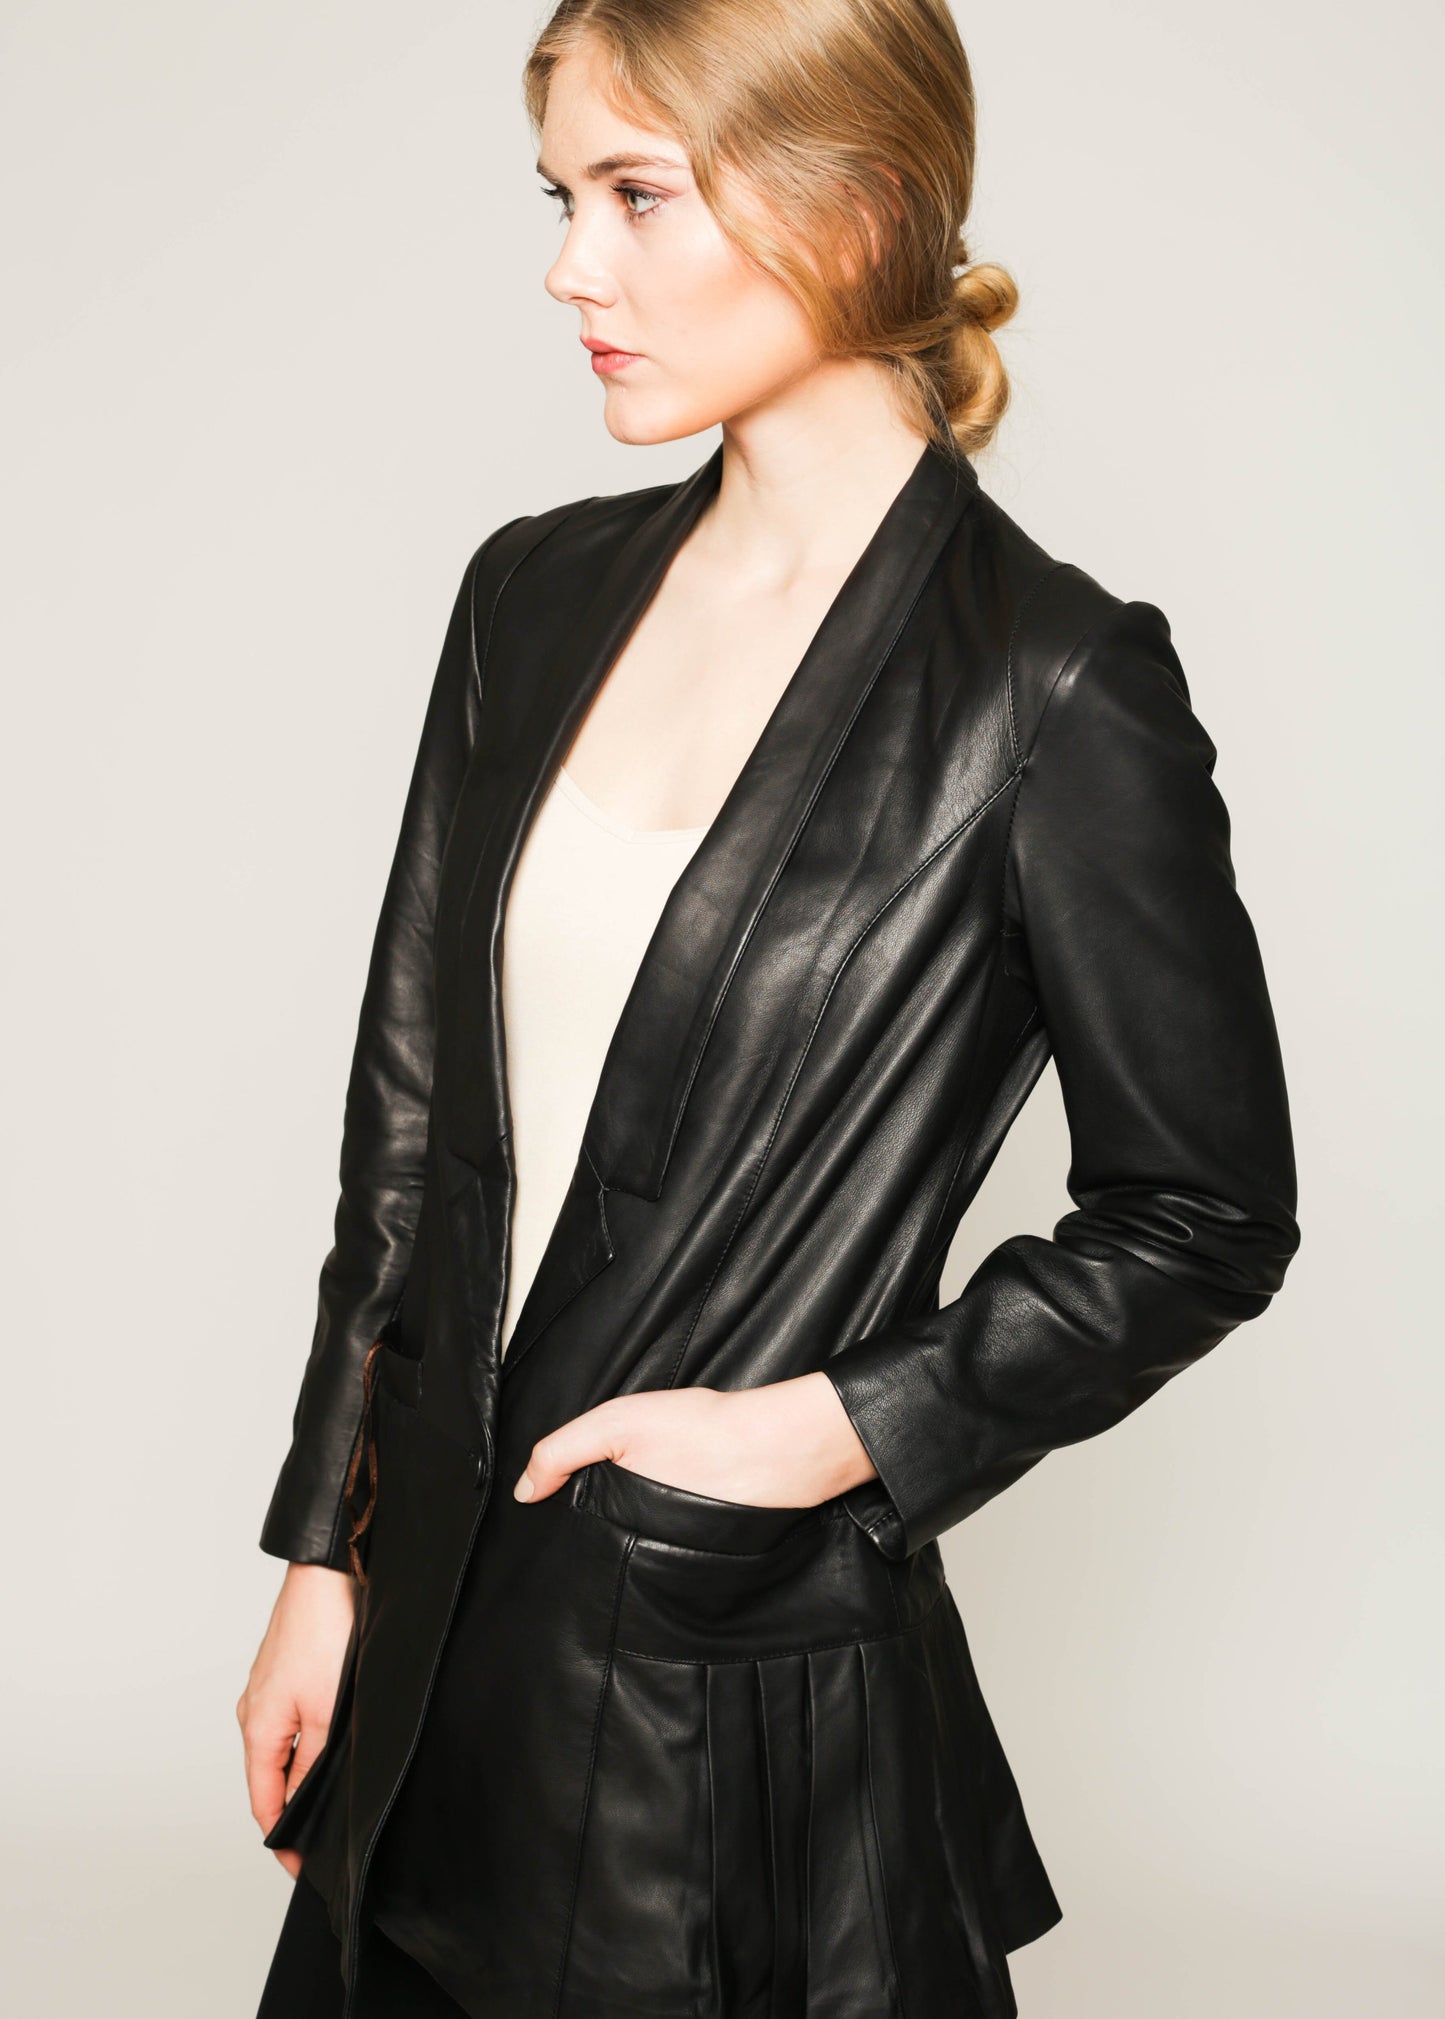 Butter leather long jacket with pleats details